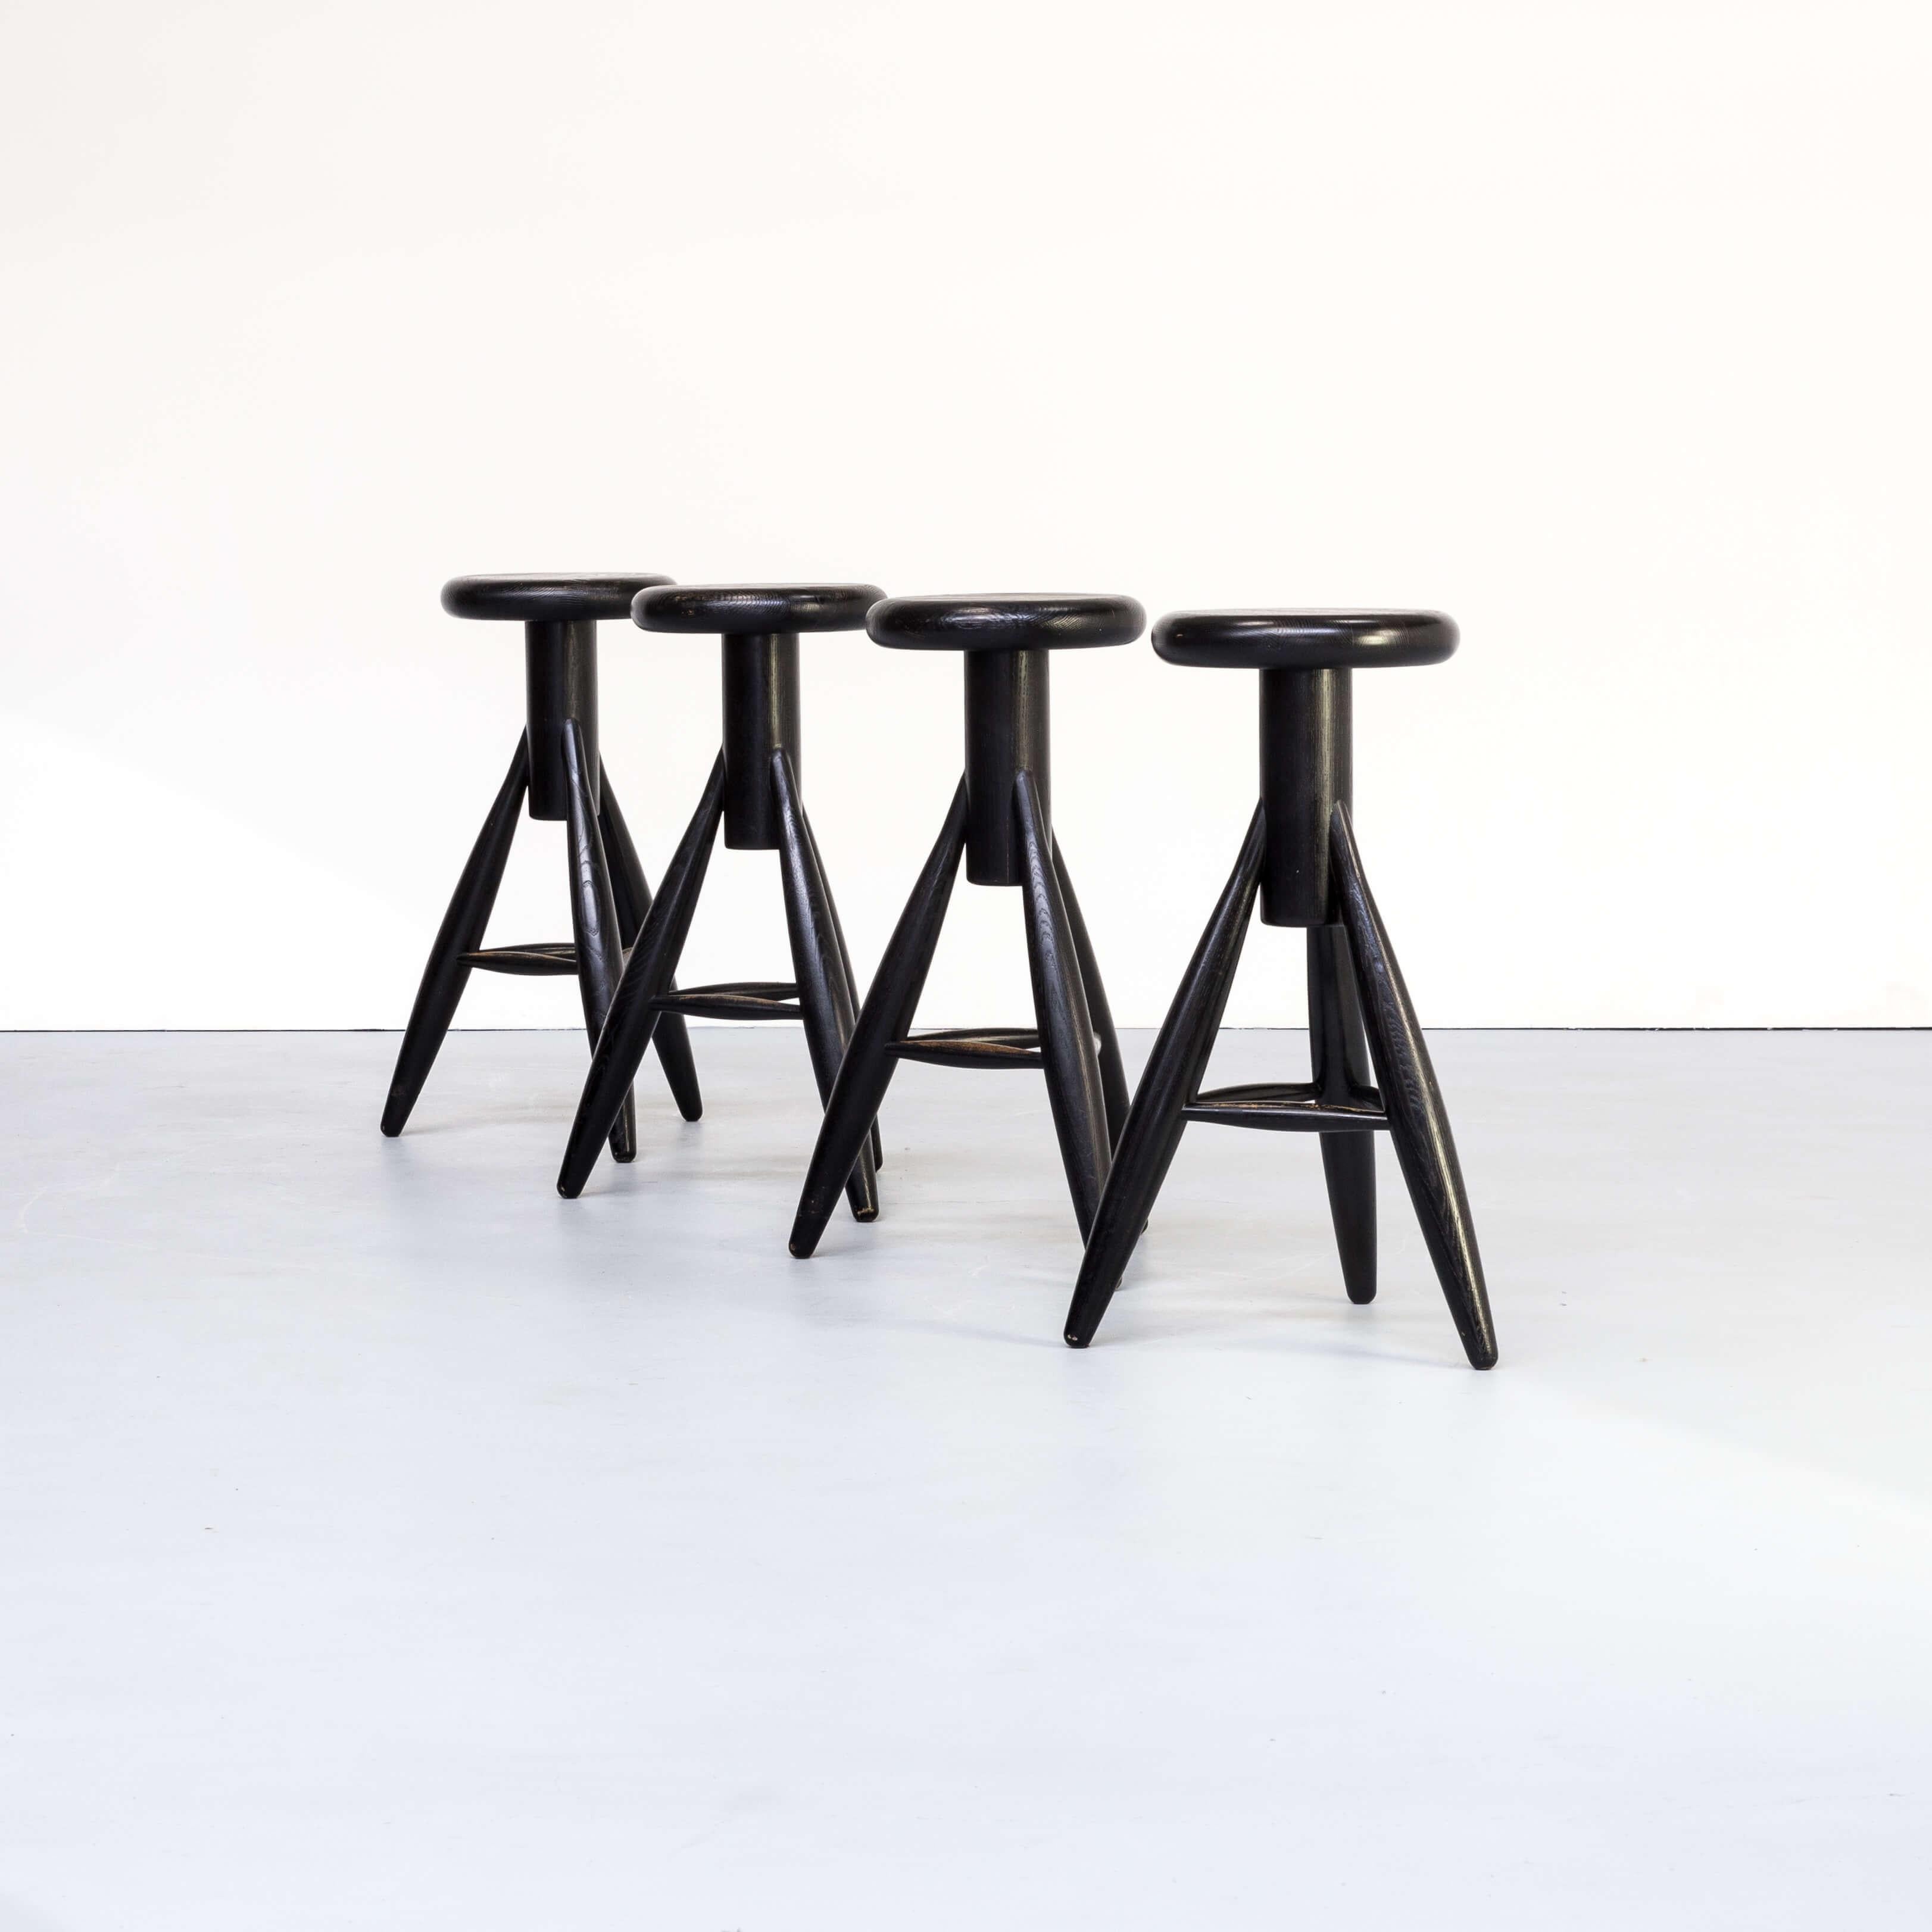 1990s Eero Aarnio ‘EA001’ black stool for Artek set/4. This set of four amazingly shaped black wooden stools is called EA001. He designed the EA001 primarily for his home kitchen bar. Full wooden quality, timeless object. Good condition consistent